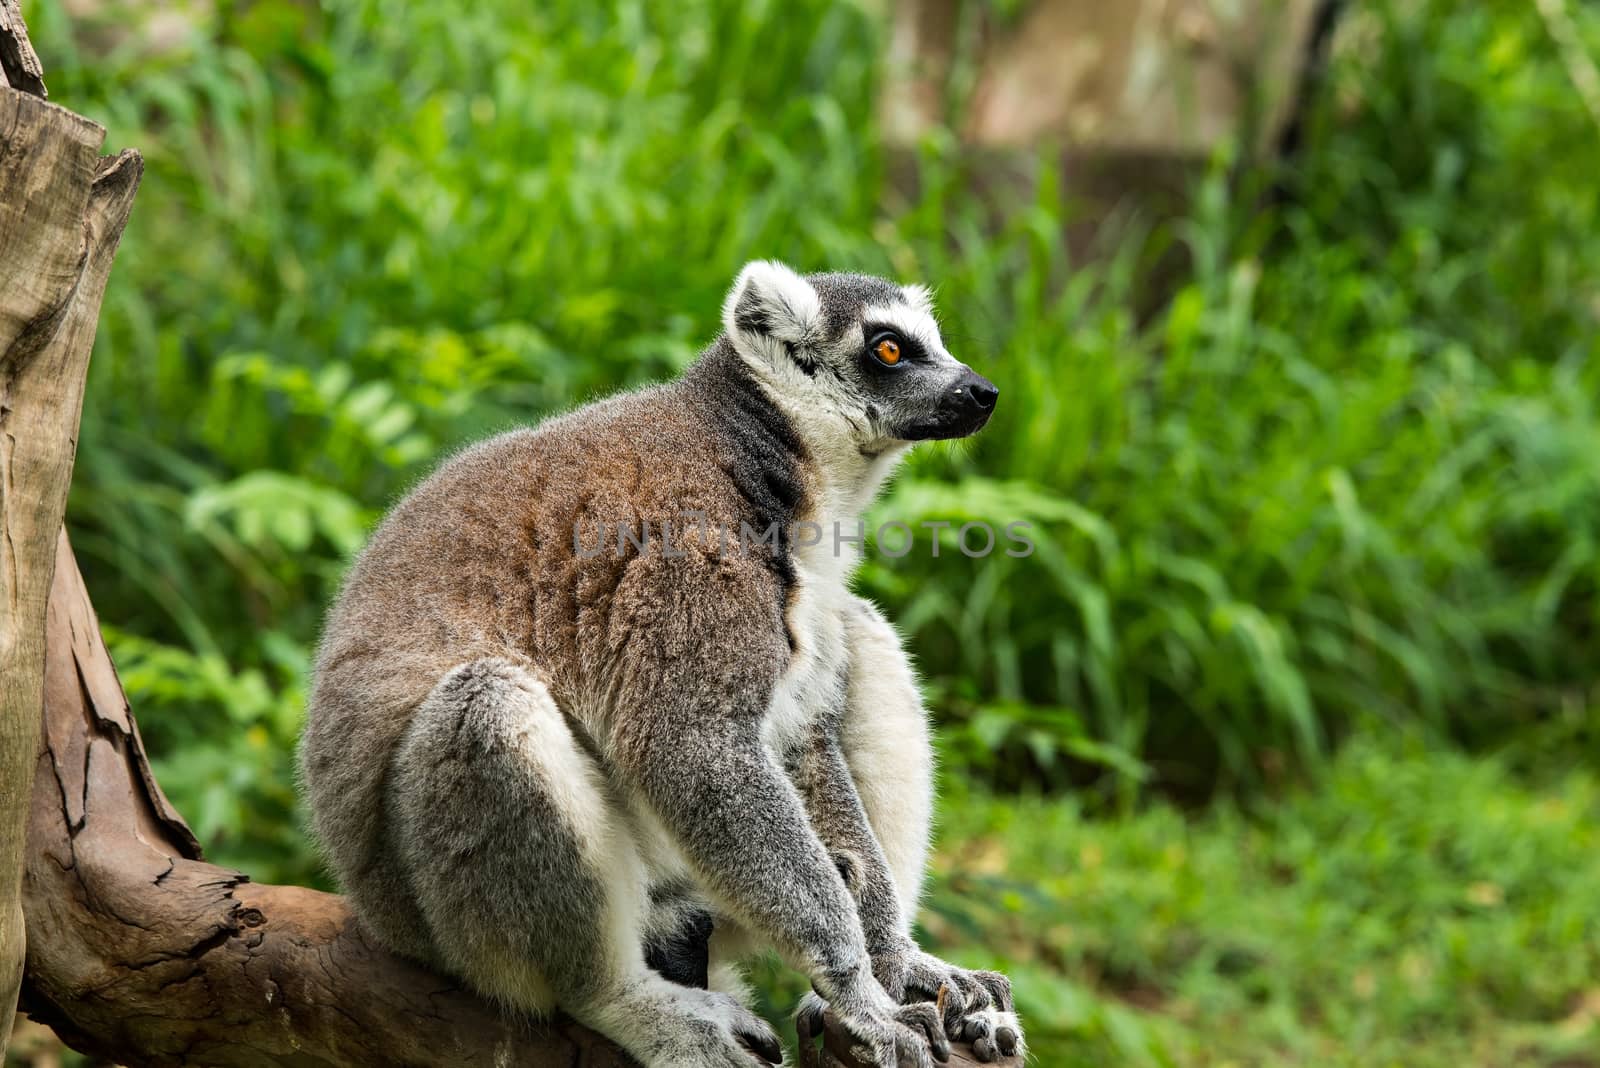 Lemuriformes is an infraorder of primate that falls under the suborder Strepsirrhini. It includes the lemurs of Madagascar, as well as the galagos and lorisids of Africa and Asia, although a popular alternative taxonomy places the lorisoids in their own infraorder, Lorisiformes.